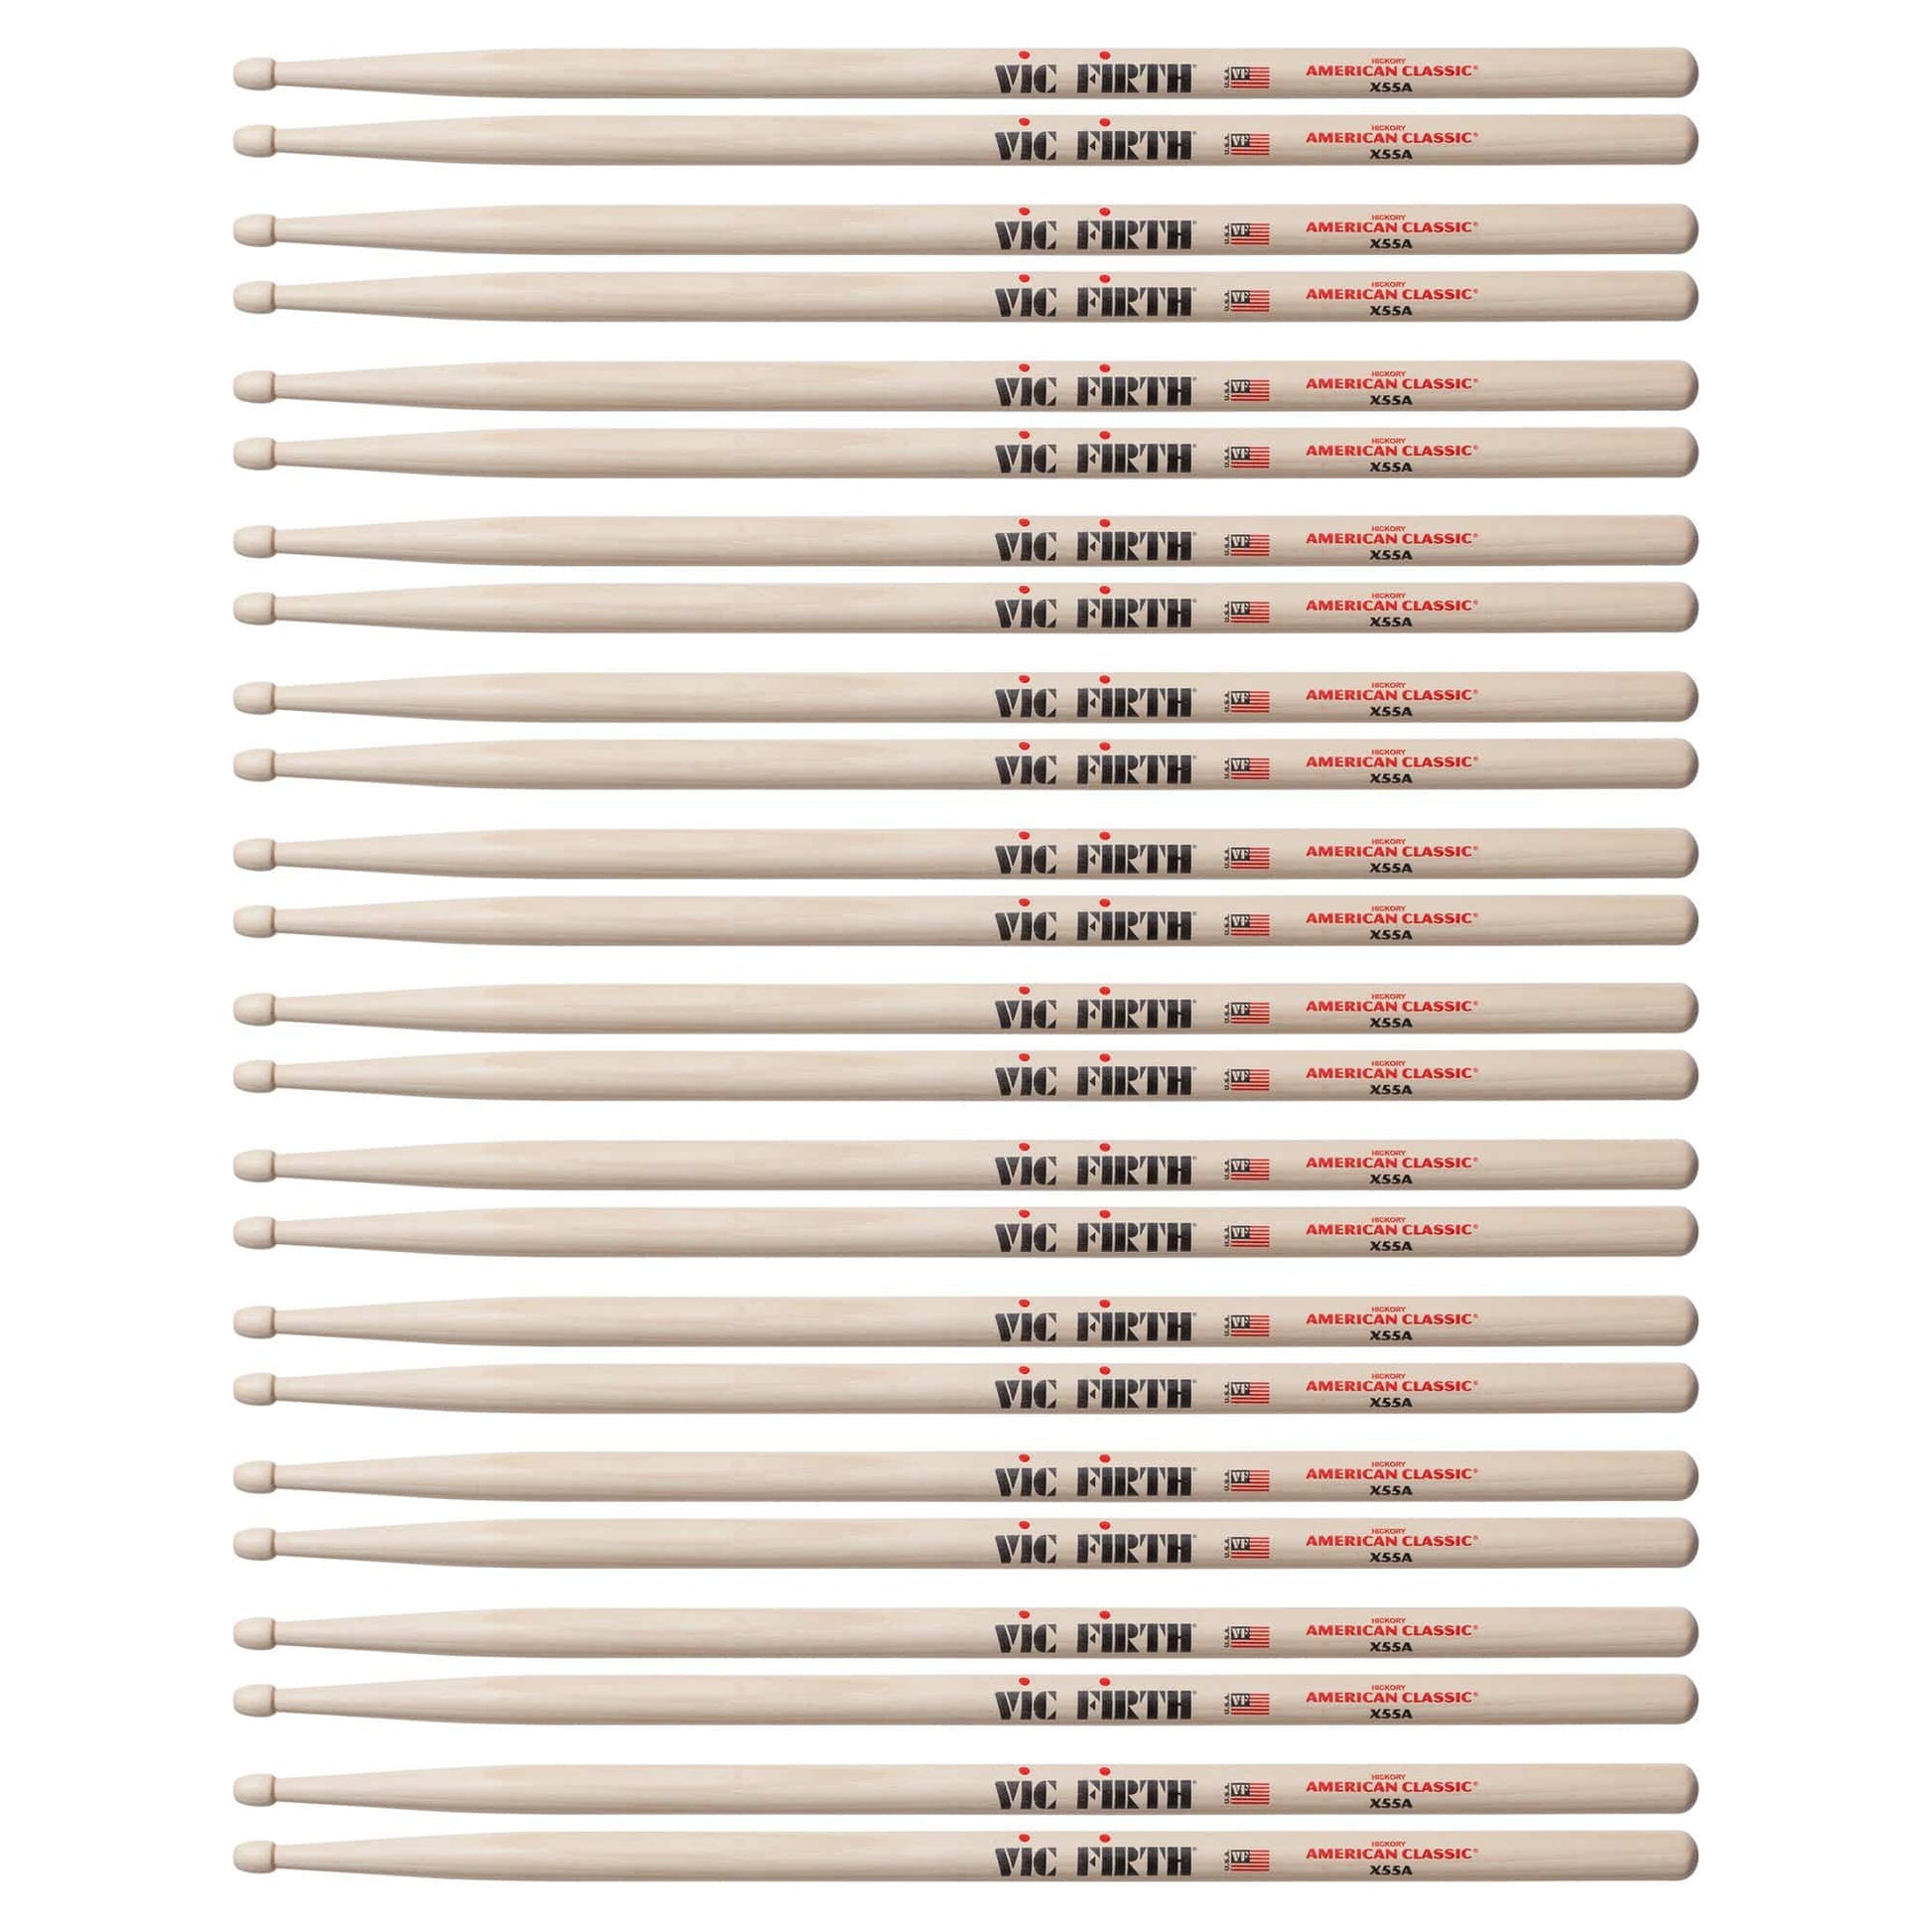 Vic Firth American Classic Extreme 55A Wood Tip Drum Sticks (12 Pair Bundle) Drums and Percussion / Parts and Accessories / Drum Sticks and Mallets